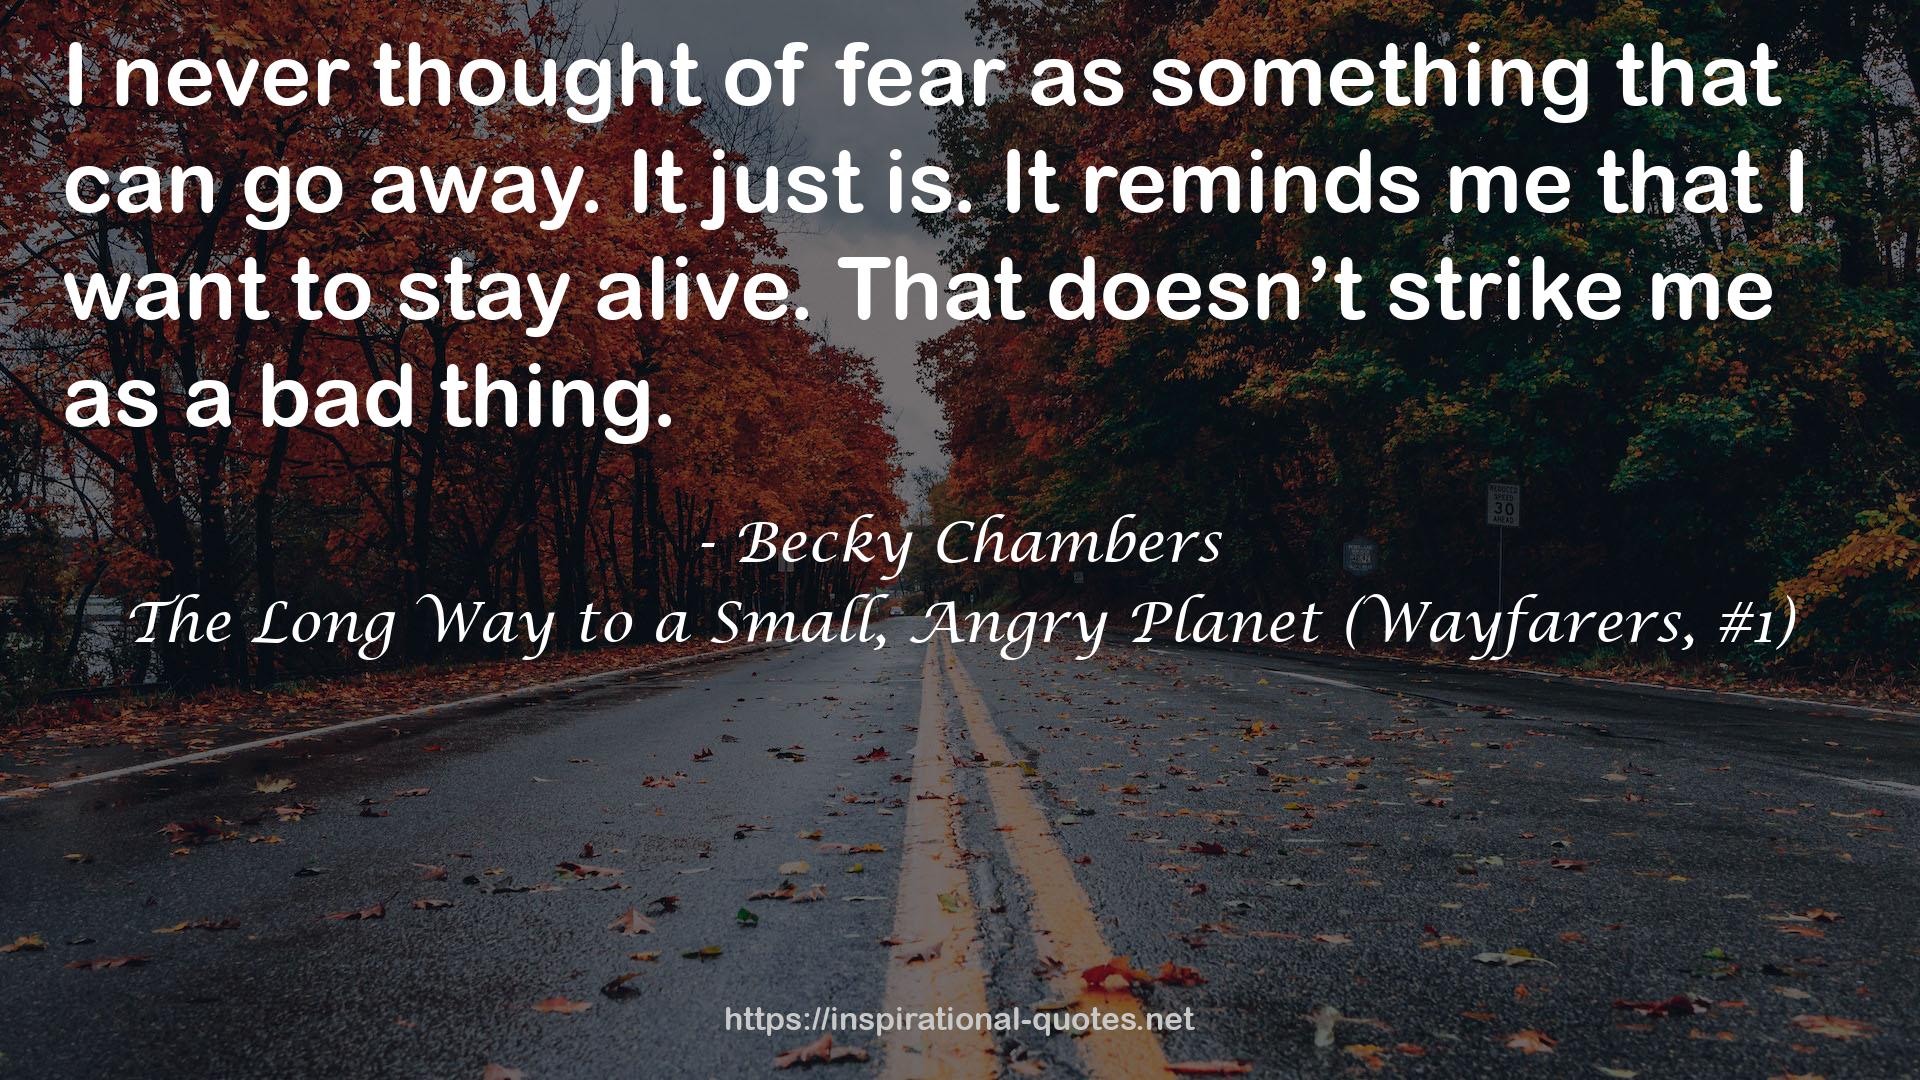 Becky Chambers QUOTES